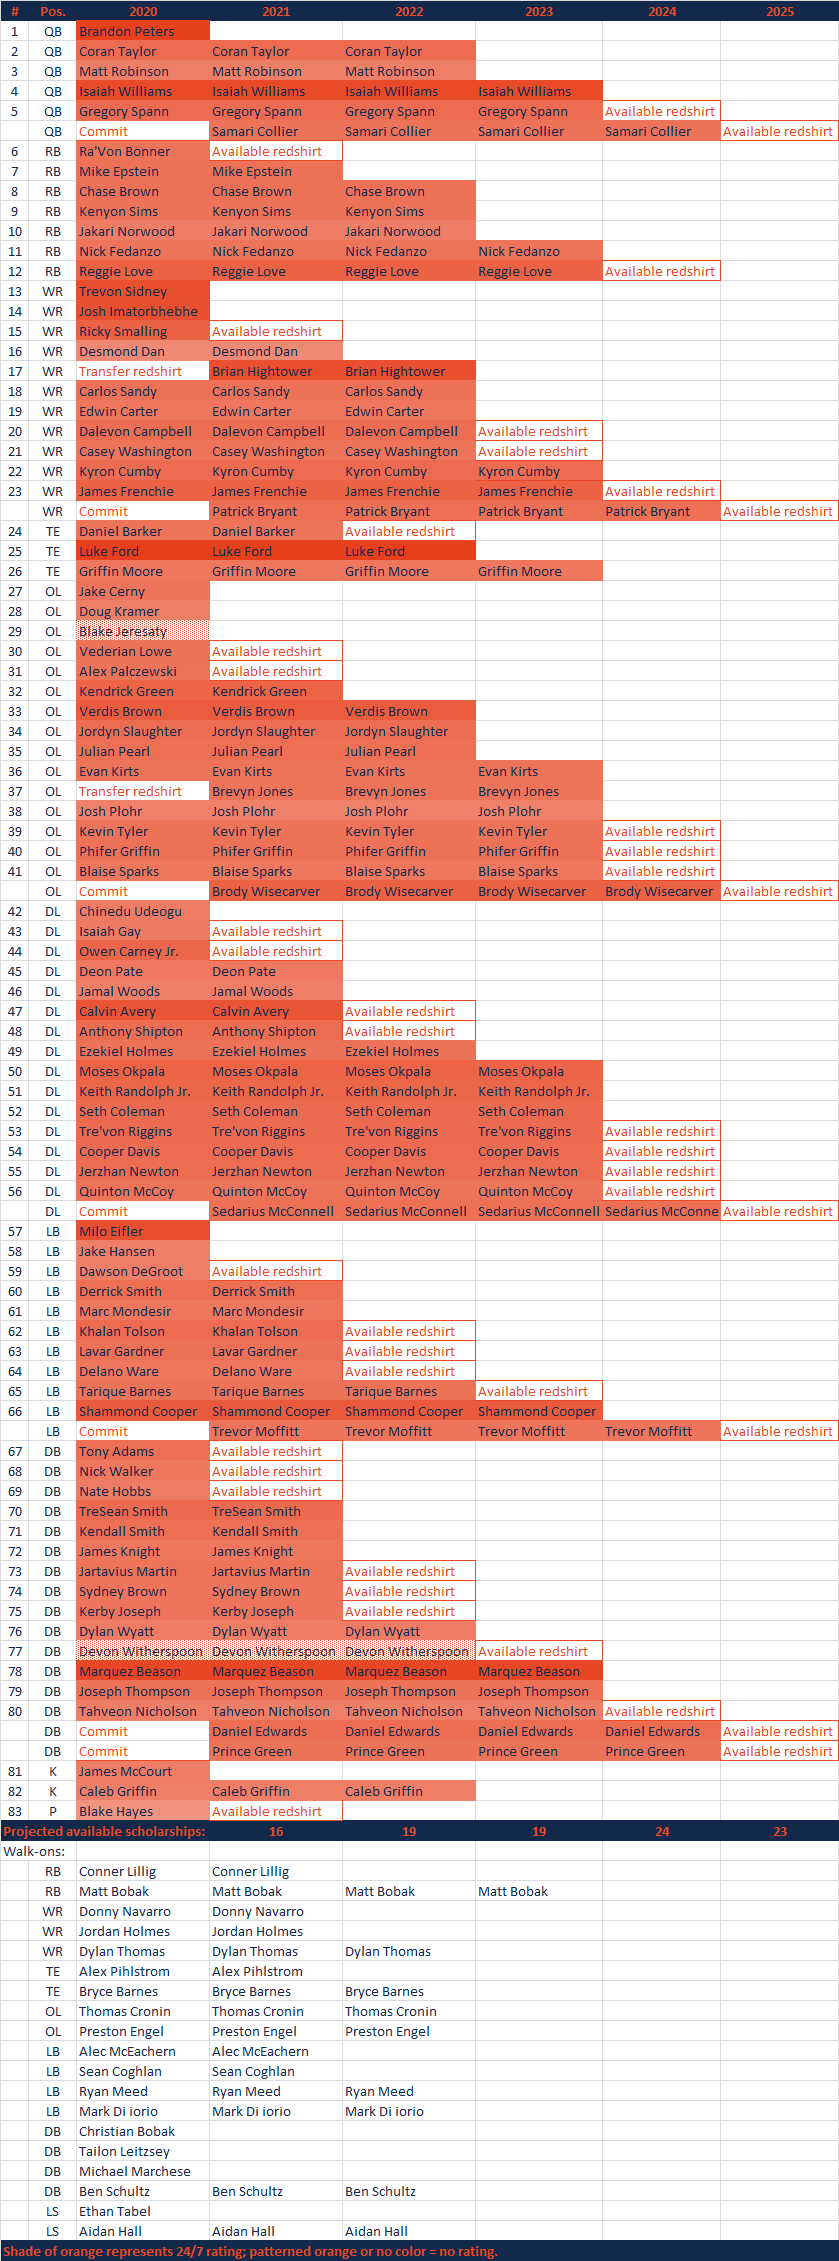 2020ScholarshipGrid0615.png